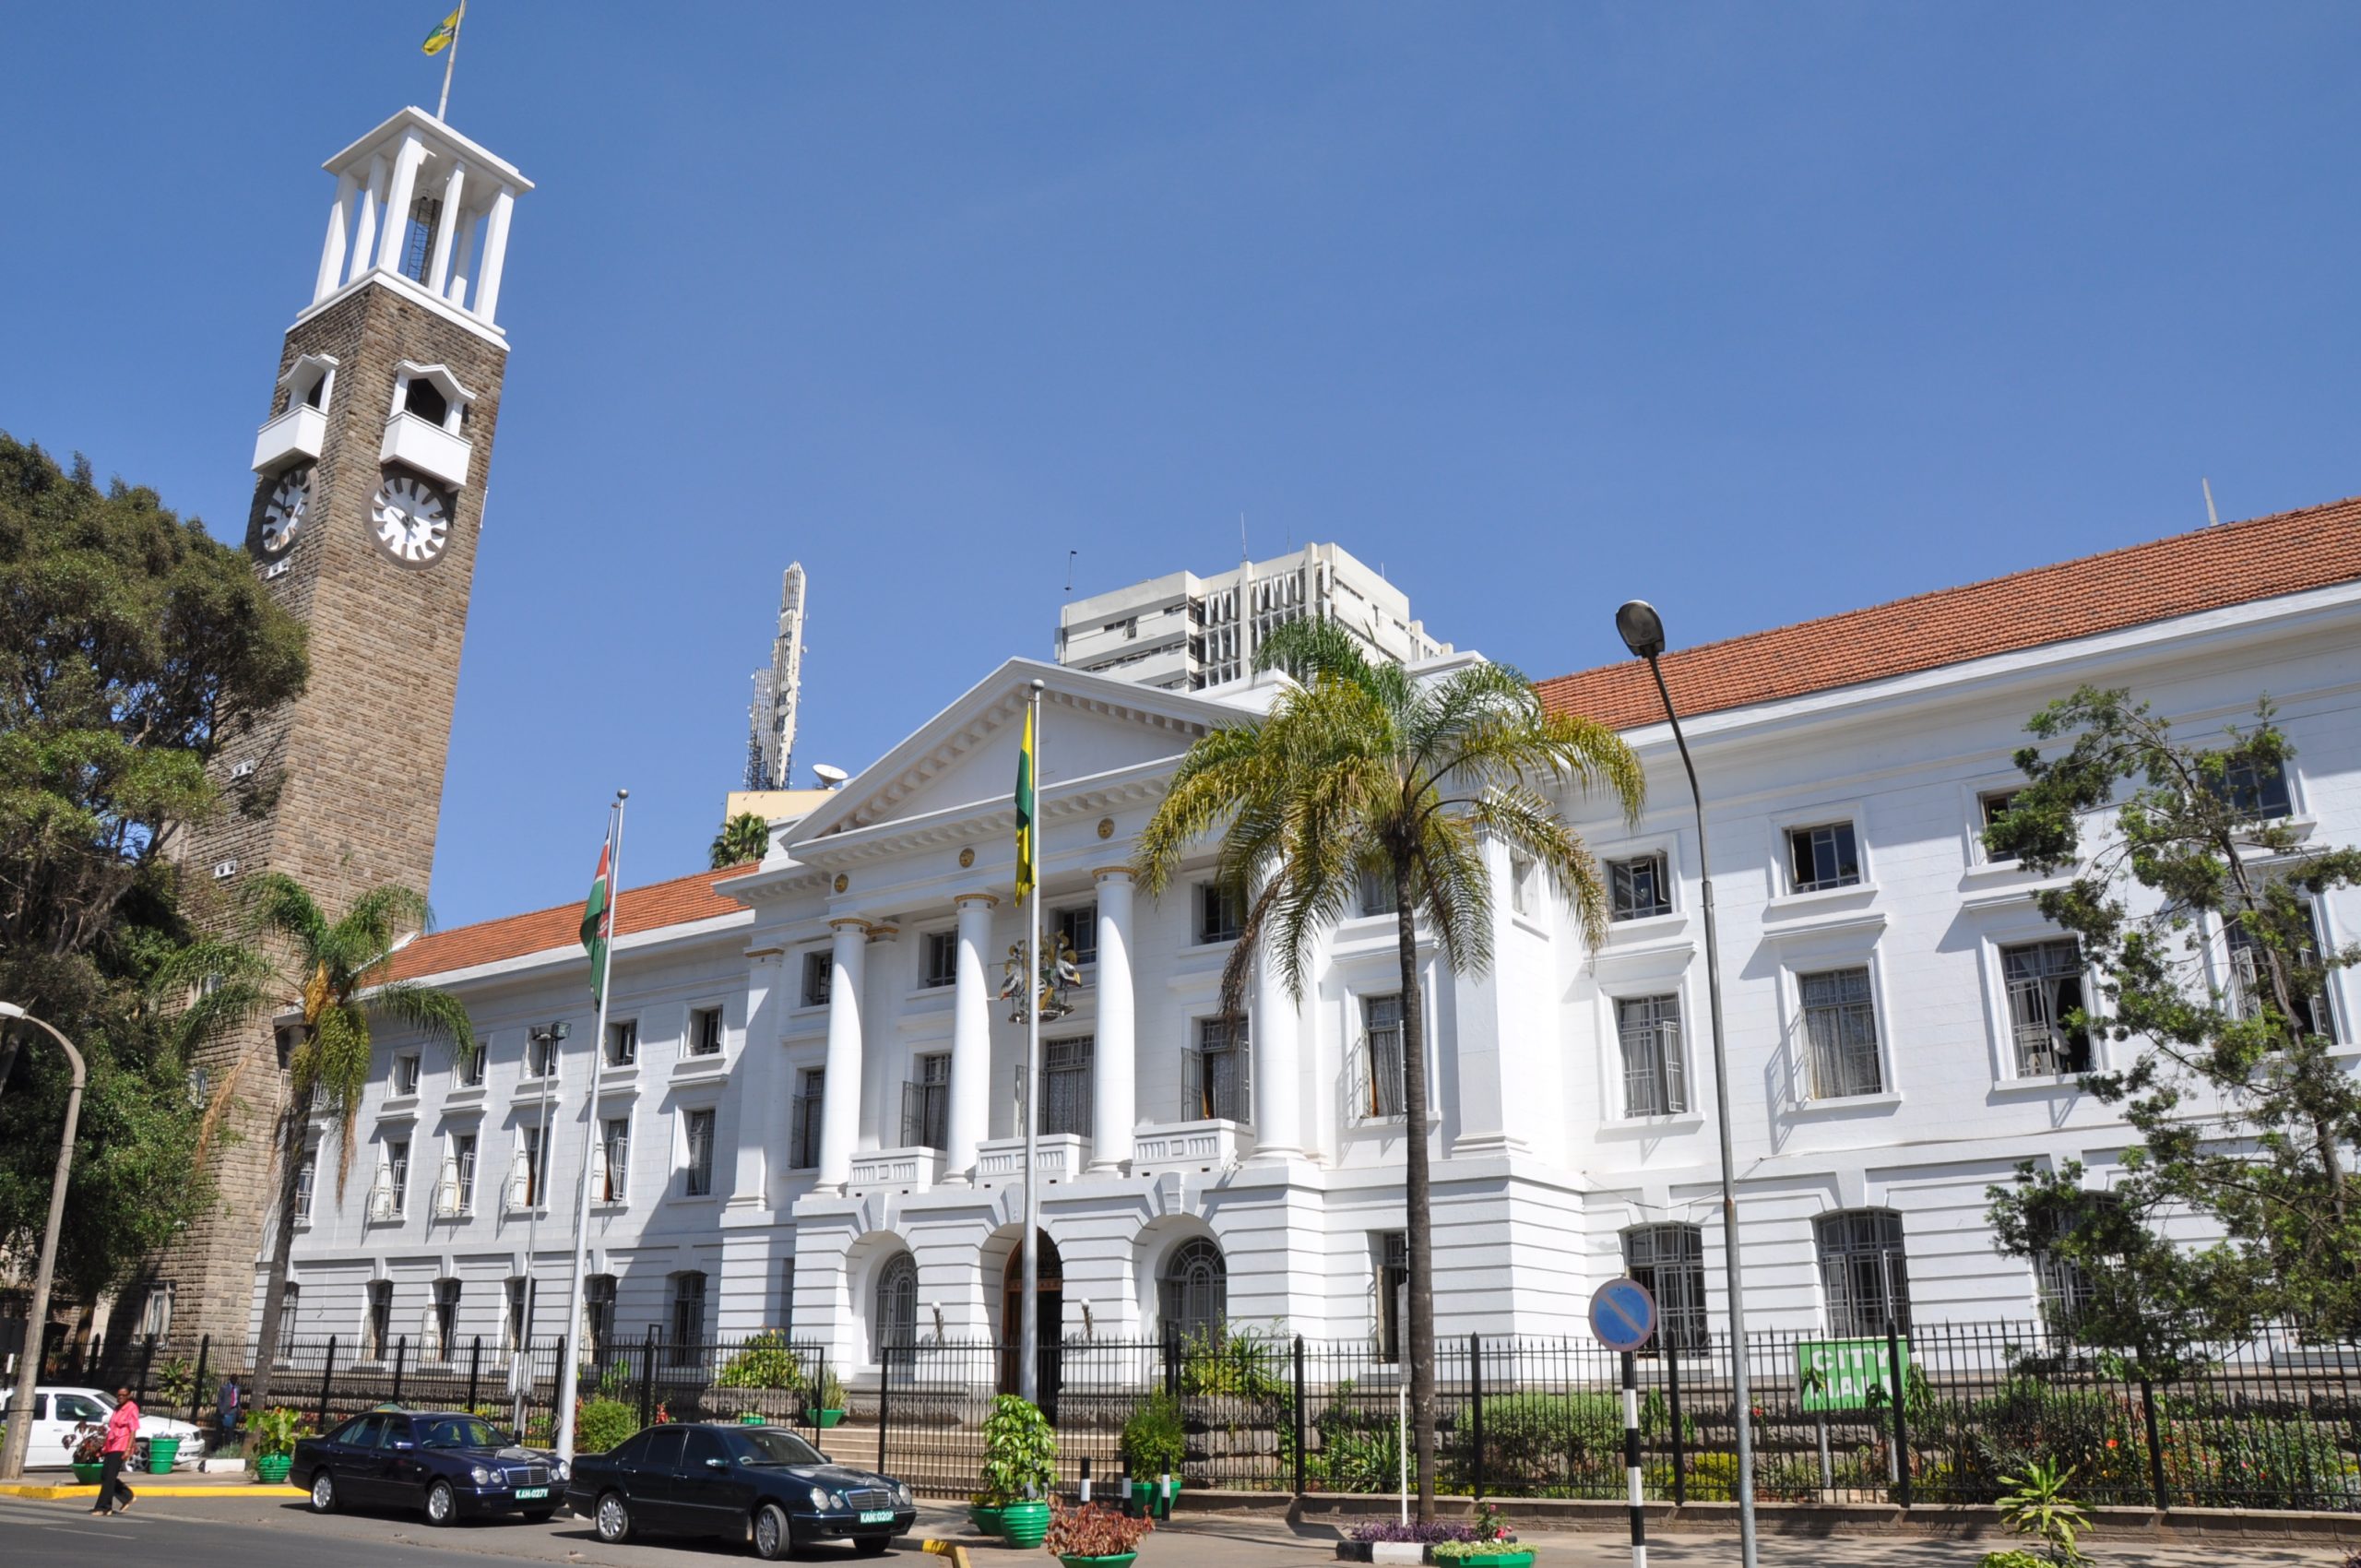 City Hall operations disrupted after Safaricom disconnects internet services over debt claims